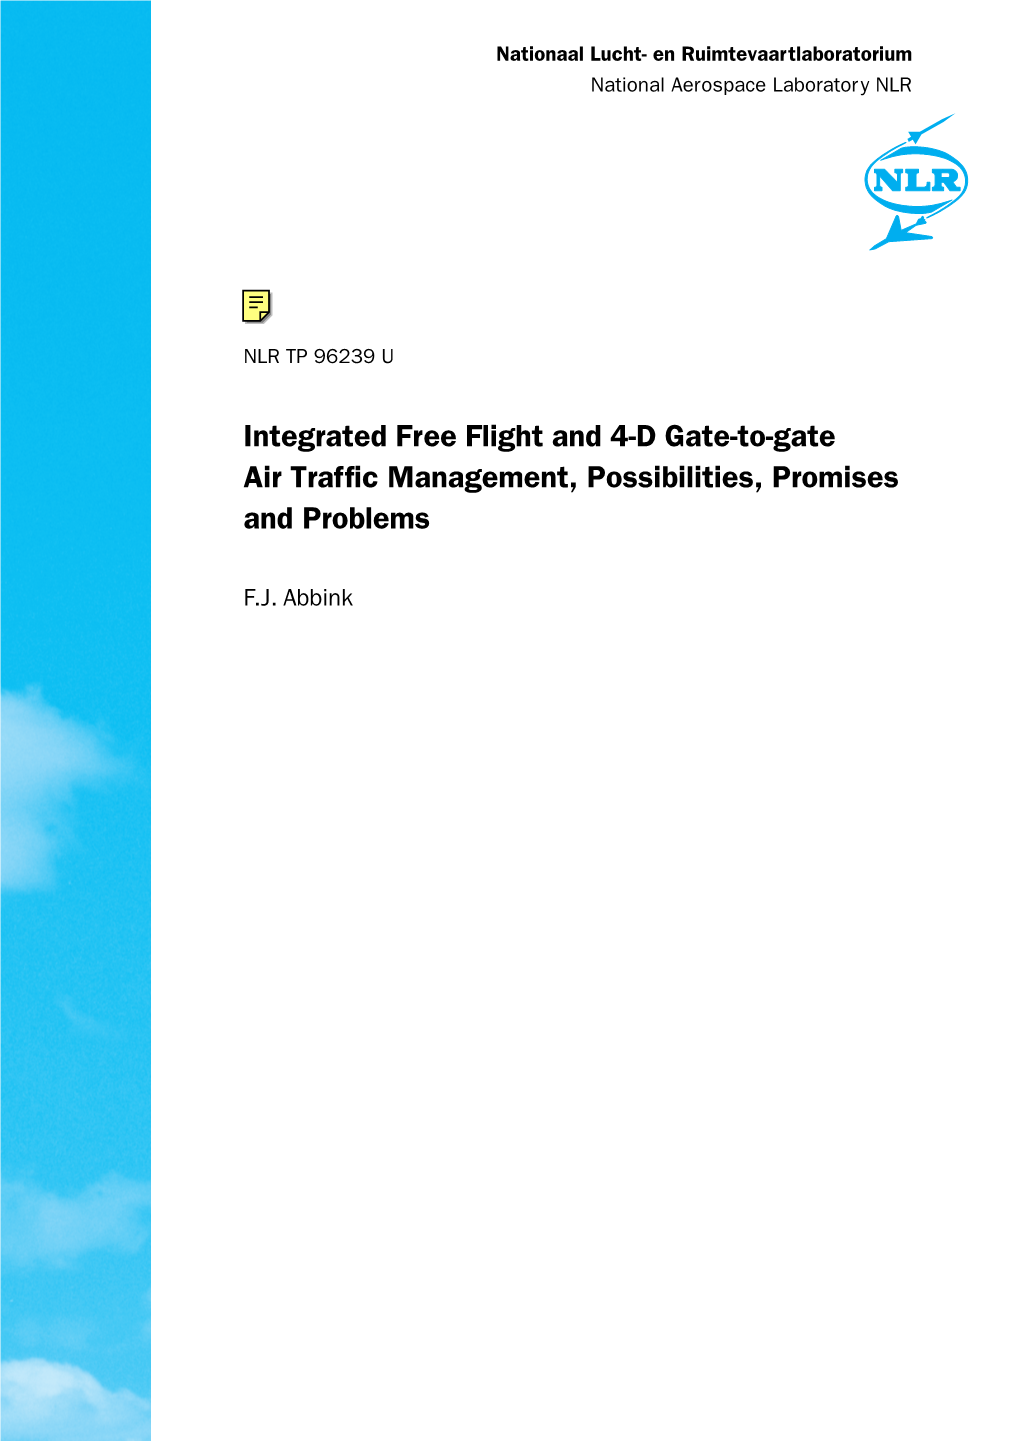 Integrated Free Flight and 4-D Gate-To-Gate Air Traffic Management, Possibilities, Promises and Problems